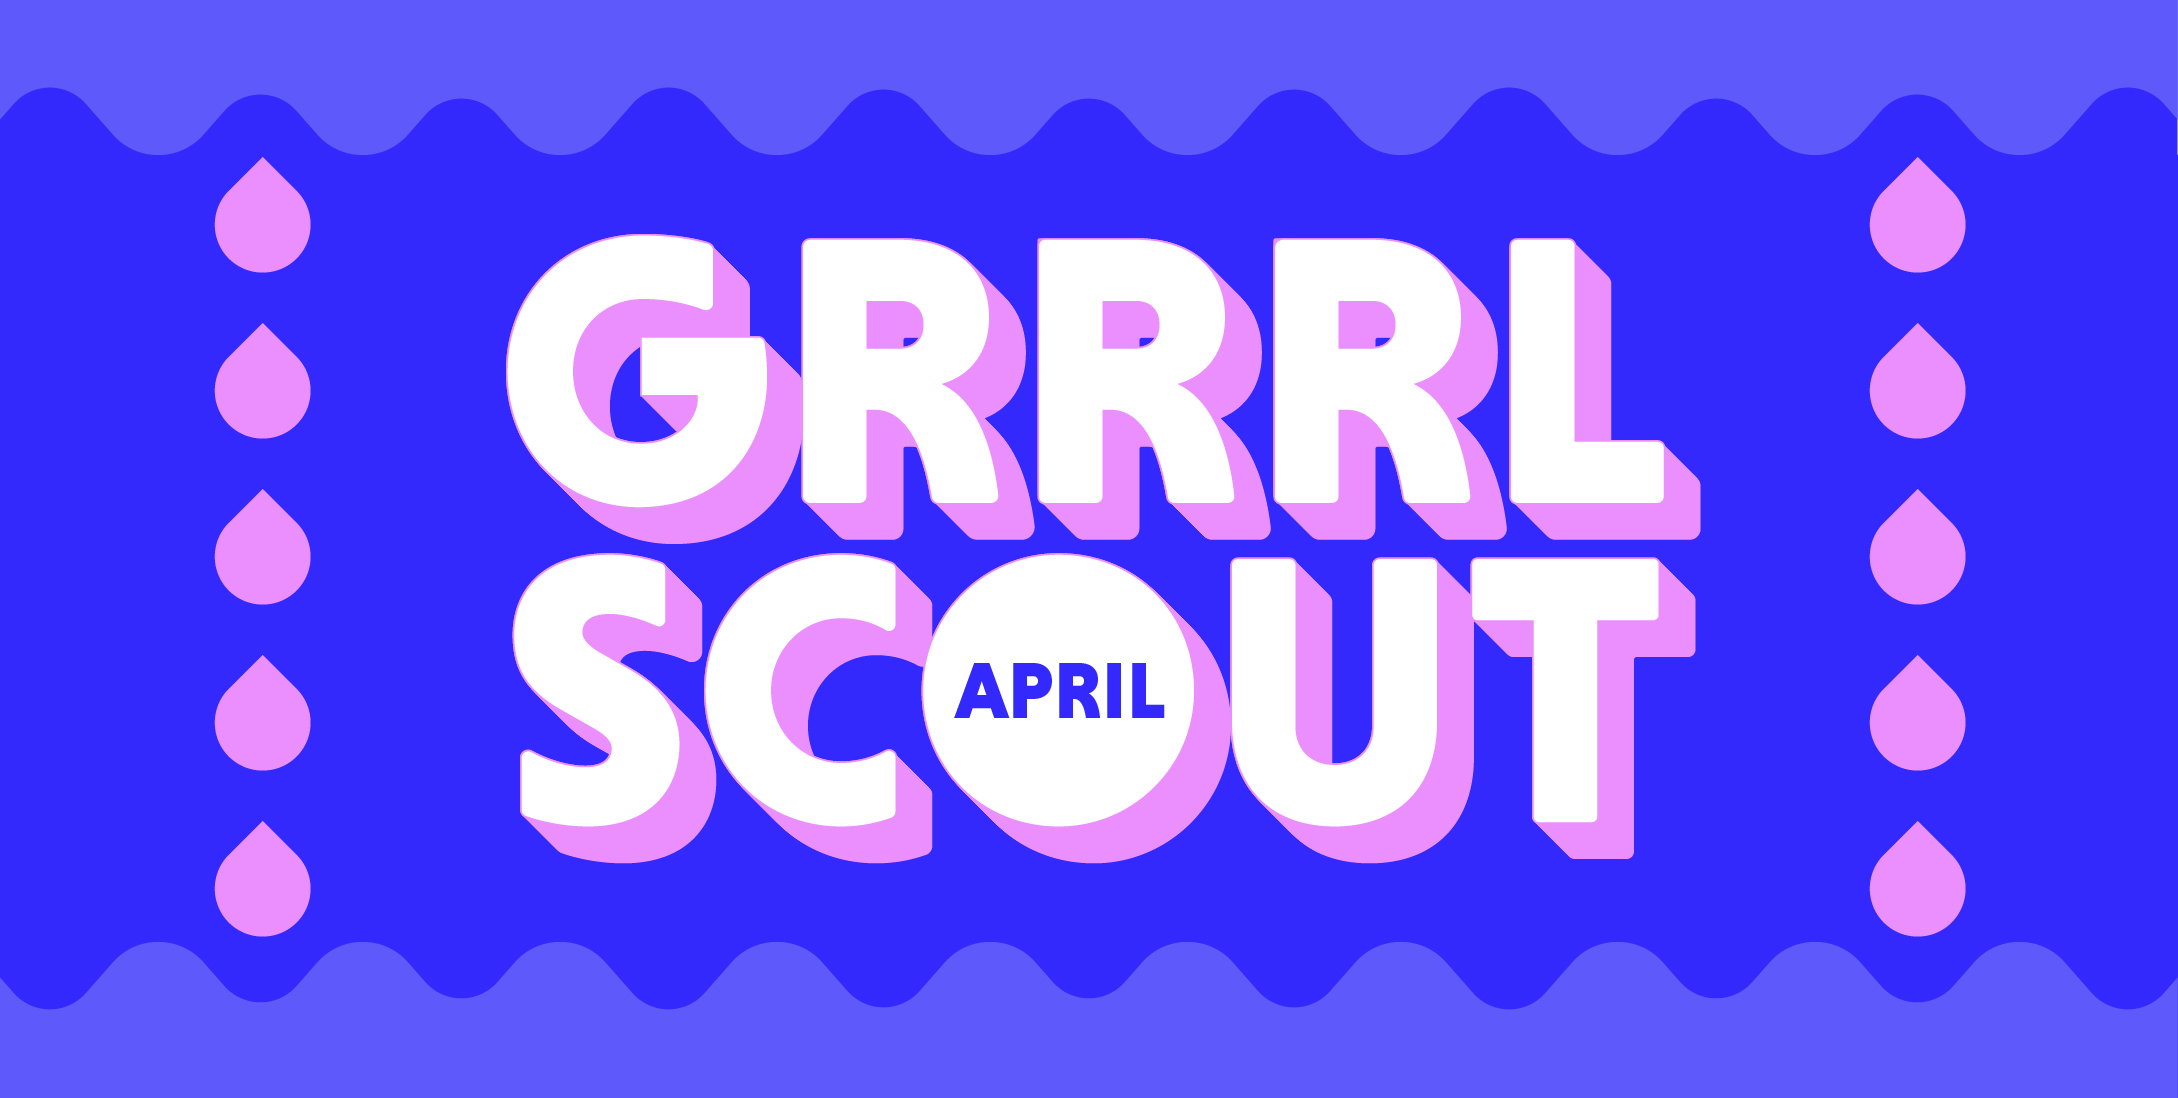 GRRRL SCOUT: April Queer Dance Party Saturday April 13th, 2024 9:00 p.m. – 1:00 a.m. The Hook and Ladder Theater $15 (+ Fees) Early Bird (Limited Availability) $20 (+ Fees) Advance $25 (+ Fees) Day of Show $35 (Flat) Door (Limited QTY Available)